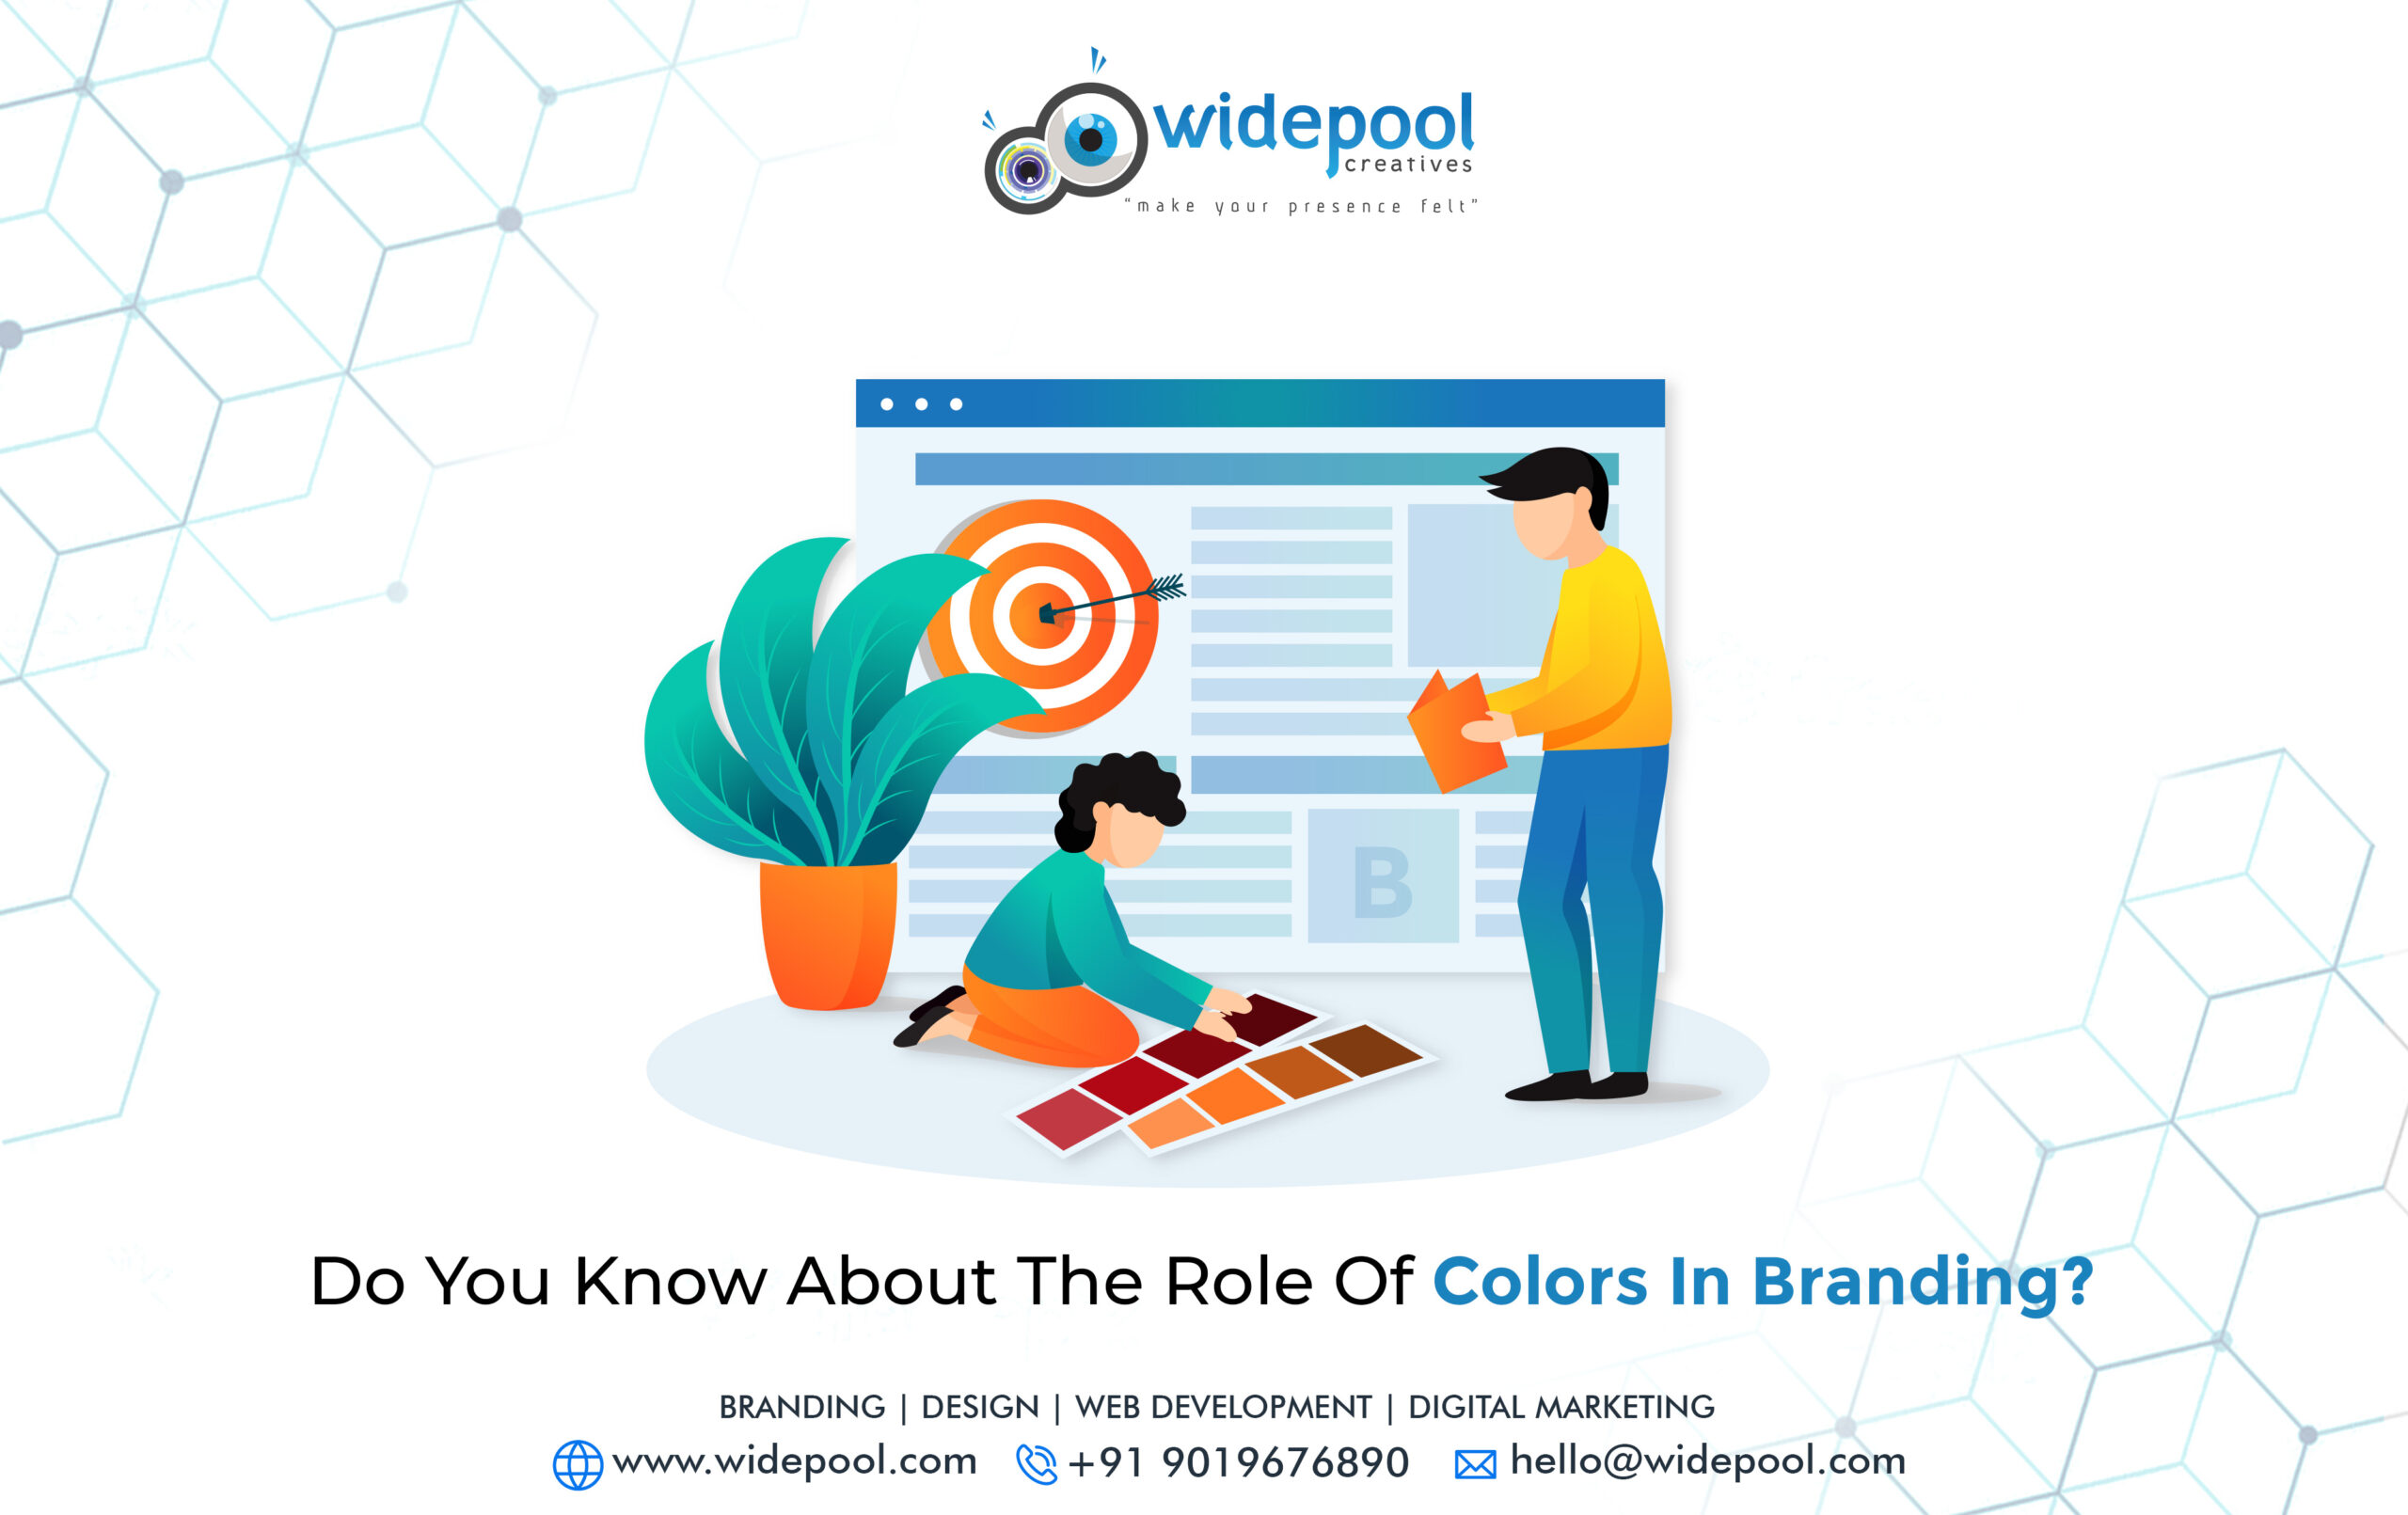 Do You Know about the Role of Colors in Branding?